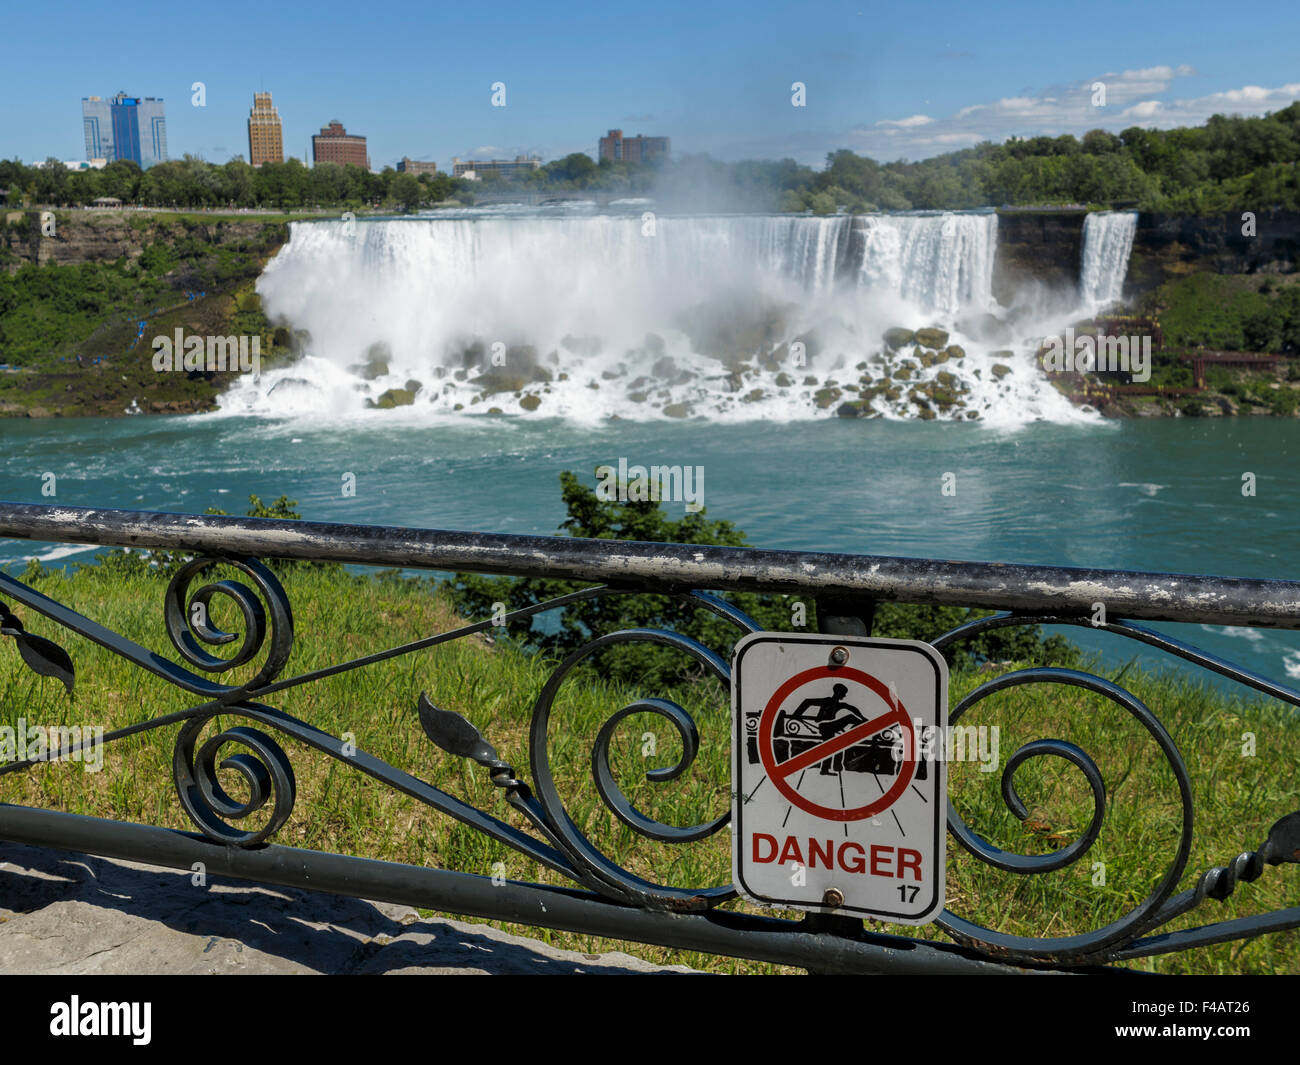 Danger sign on a metal fence facing the American Falls, one of the falls at Niagara Stock Photo